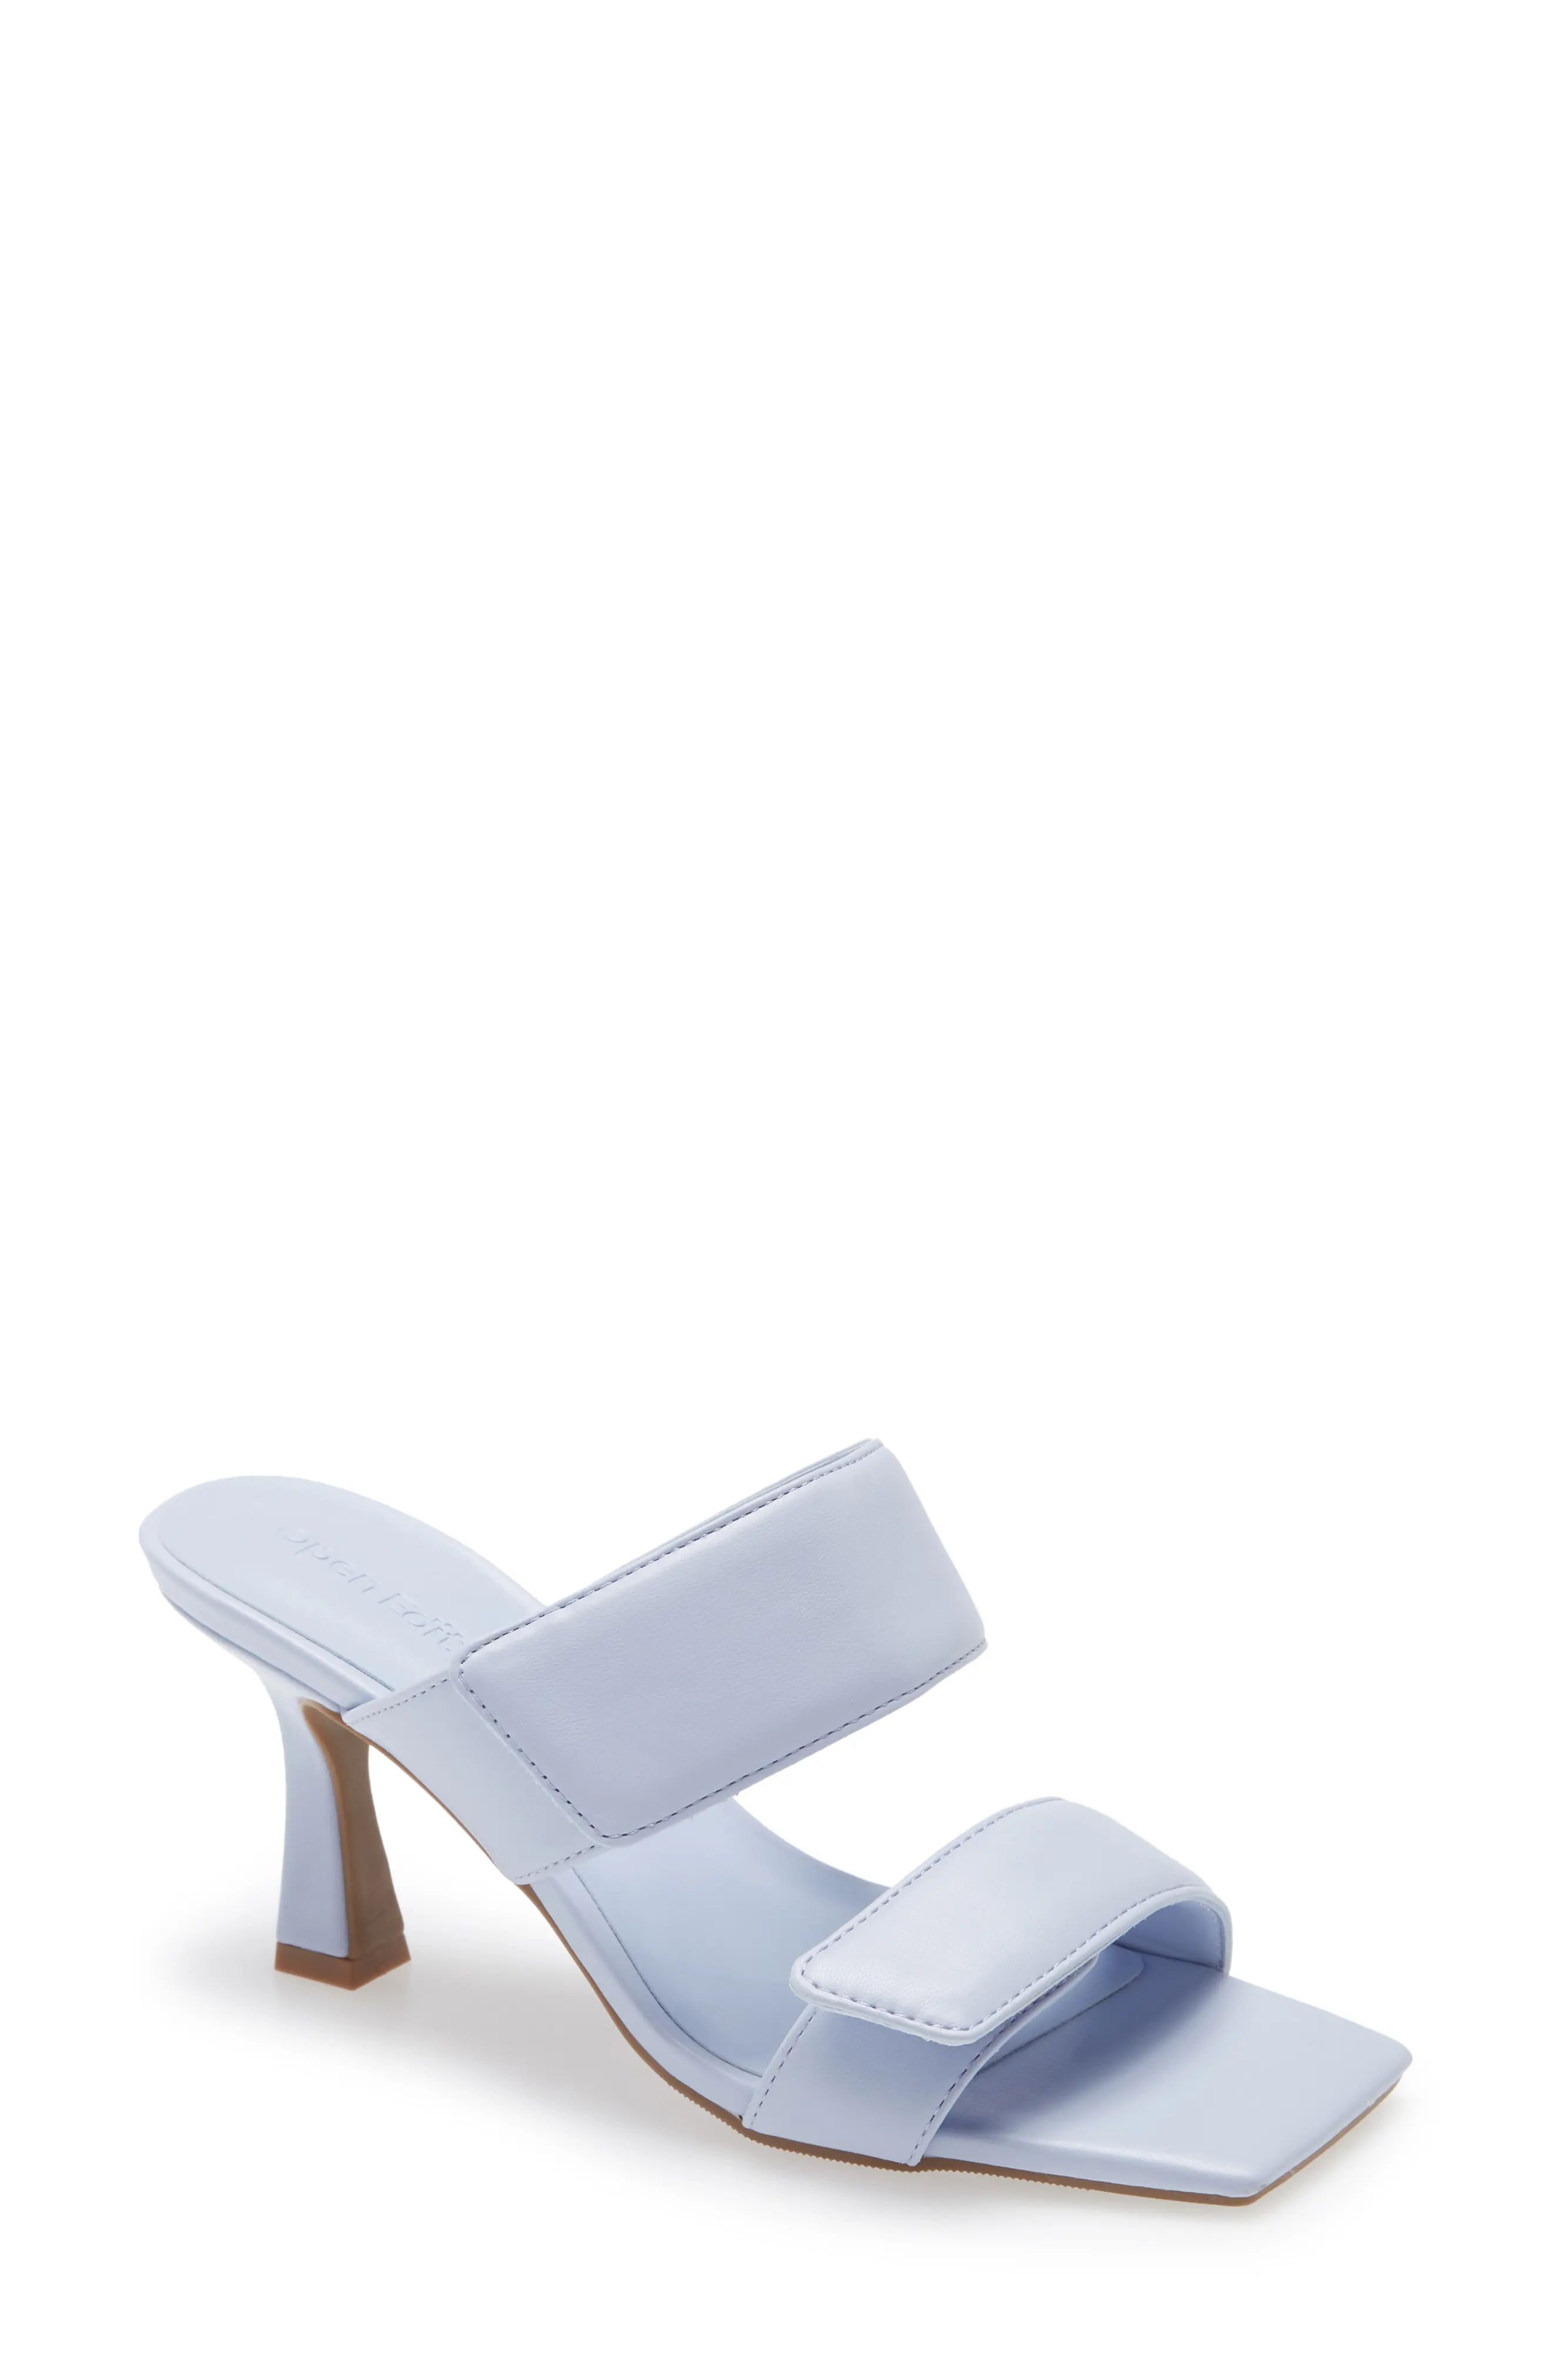 Open Edit Quincy Sandal, Size 5 in Blue Powder at Nordstrom | Nordstrom